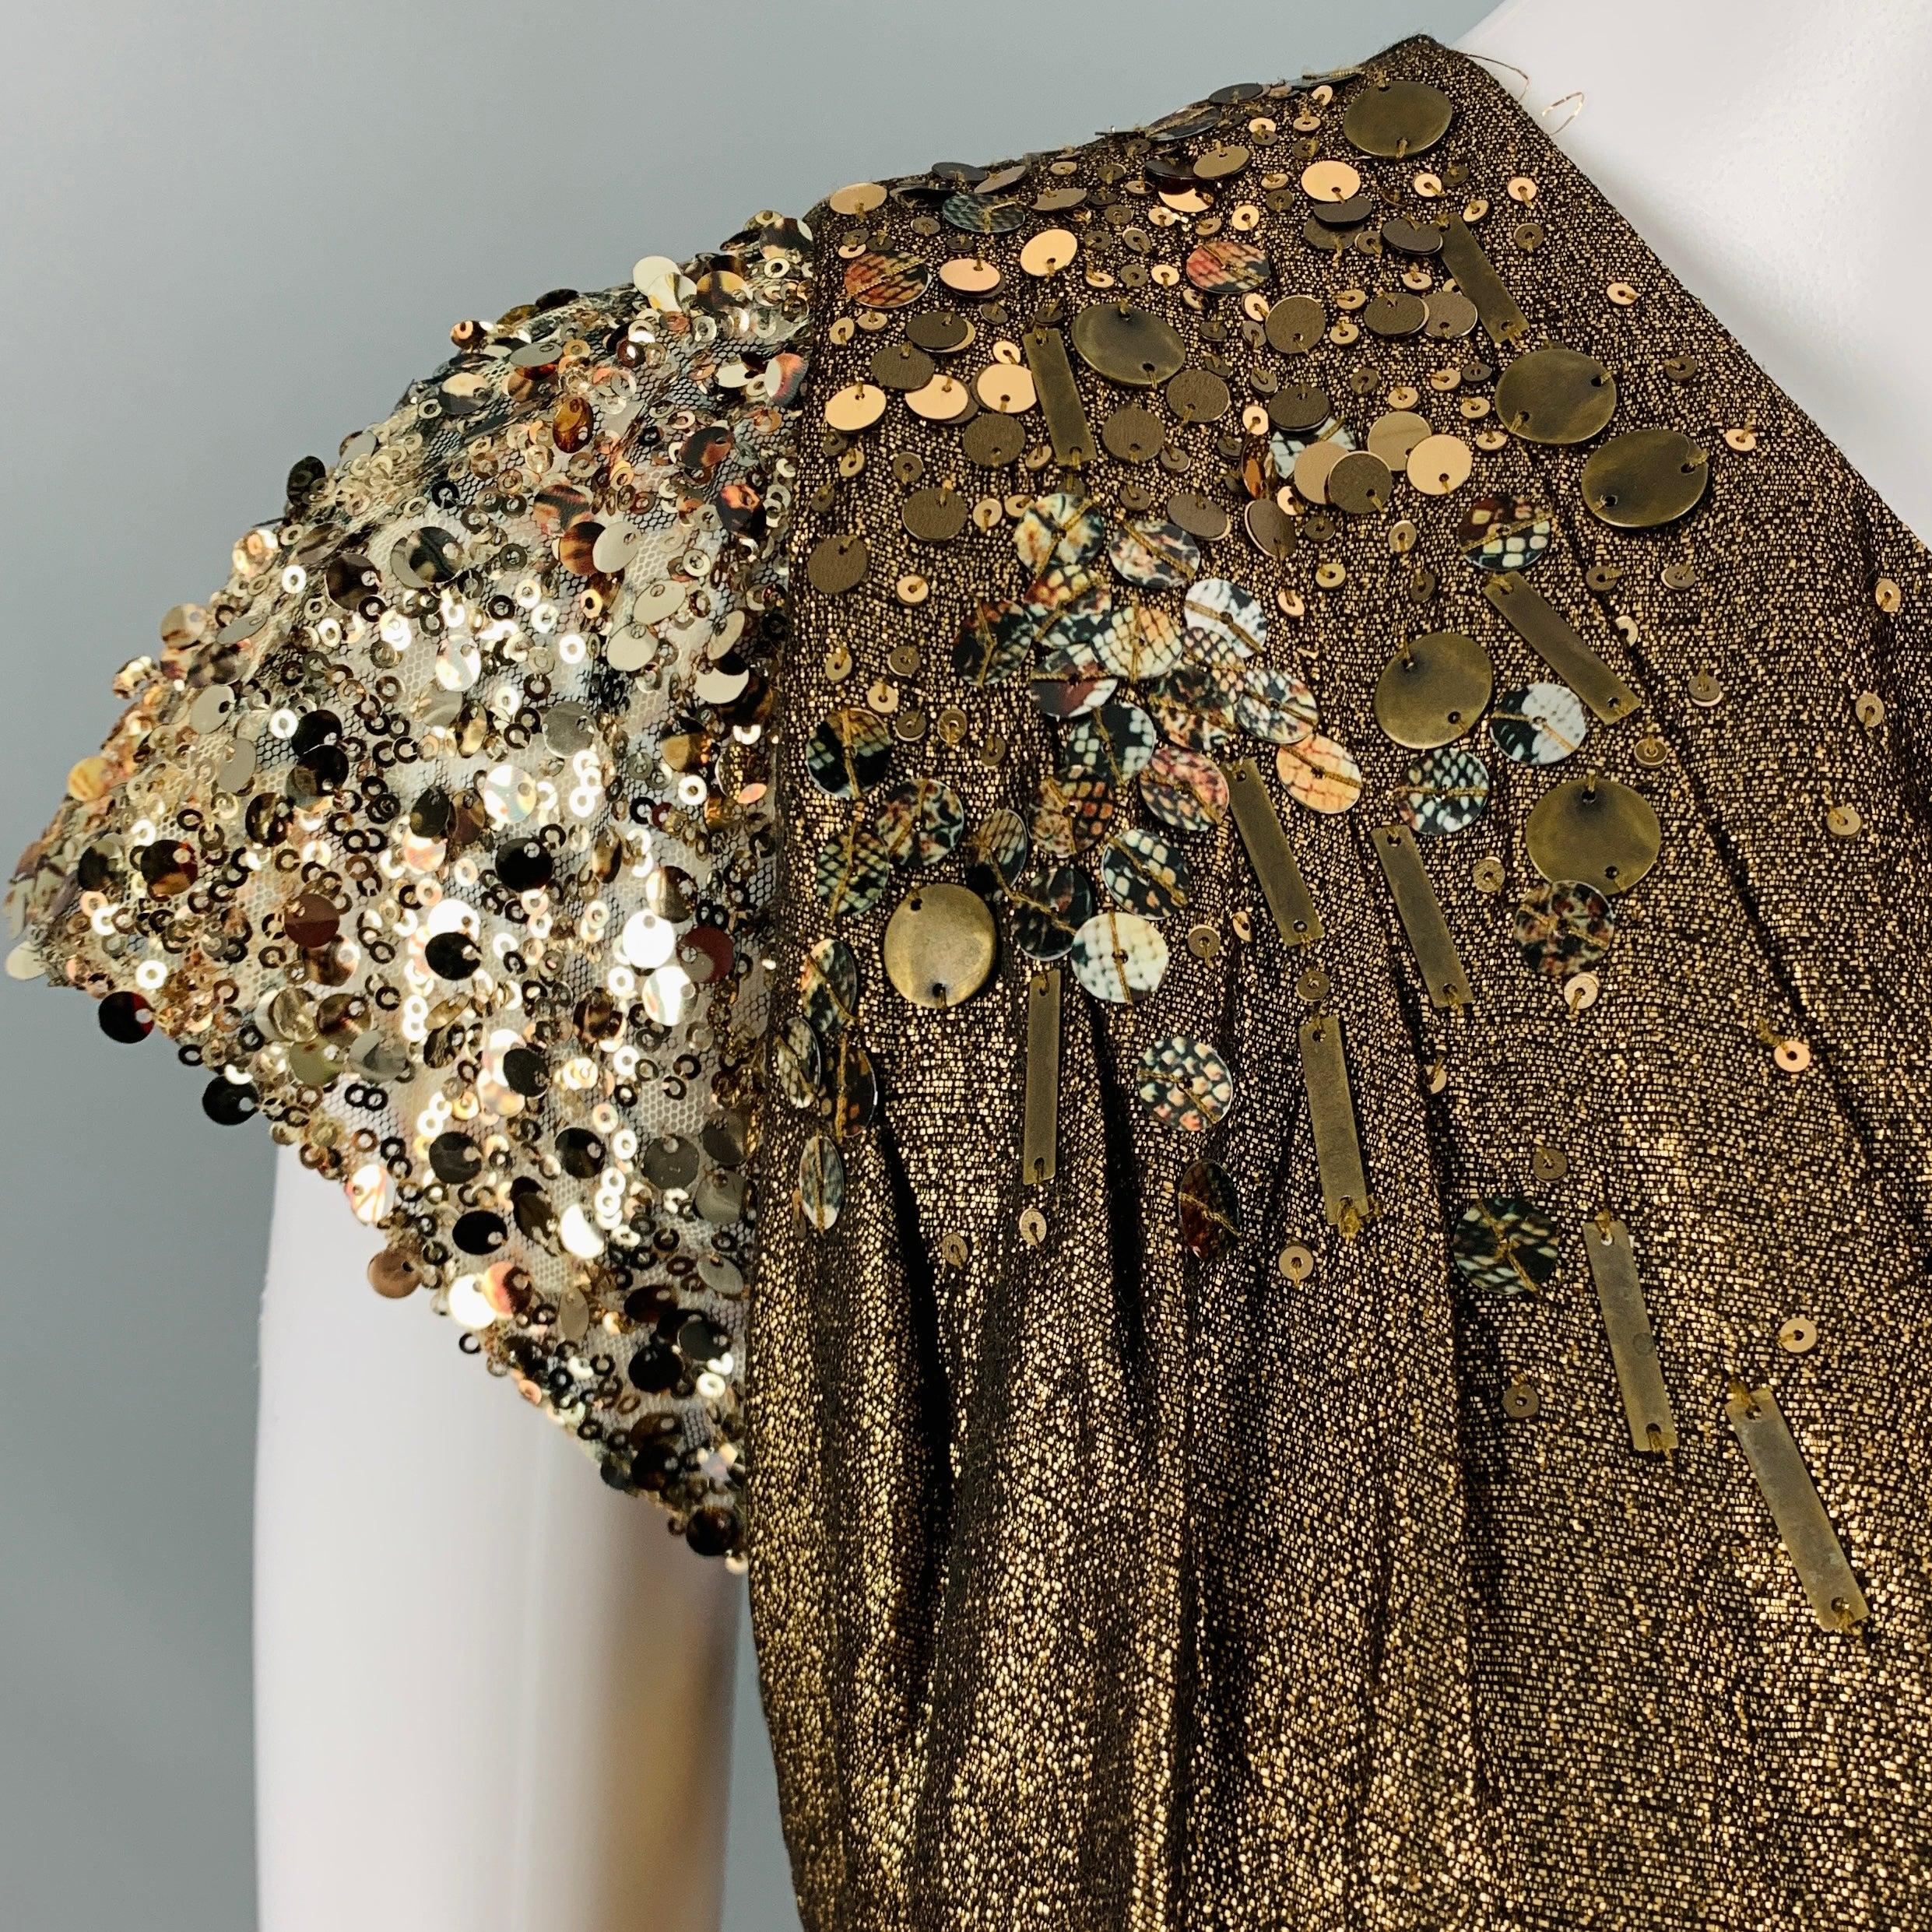 ELIE TAHARI dress
in a metallic gold cotton blend fabric featuring a one shoulder style with beaded and sequined cap sleeve, and side zipper closure. Very Good Pre-Owned Condition. Minor signs of wear. 

Marked:   IT 44 

Measurements: 
  Bust: 34